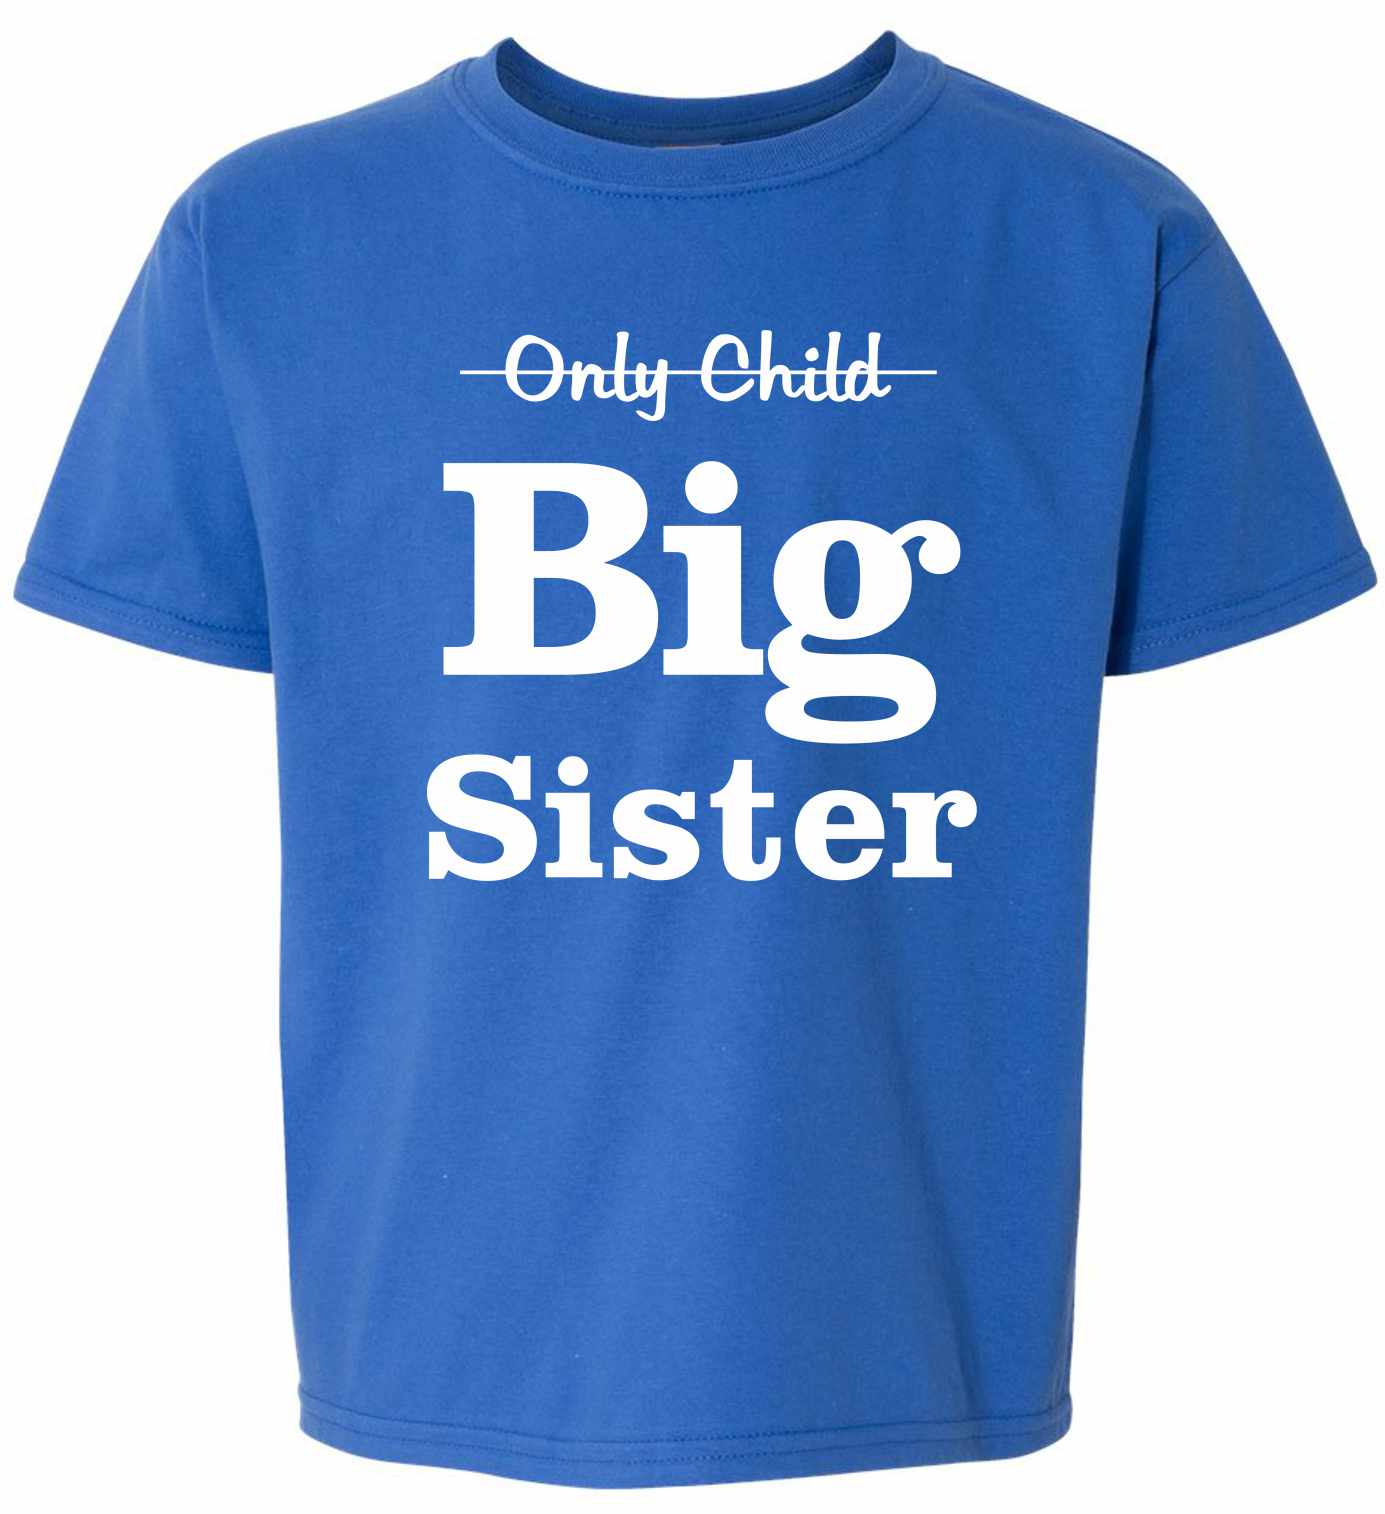 Only Child BIG SISTER on Kids T-Shirt (#967-201)